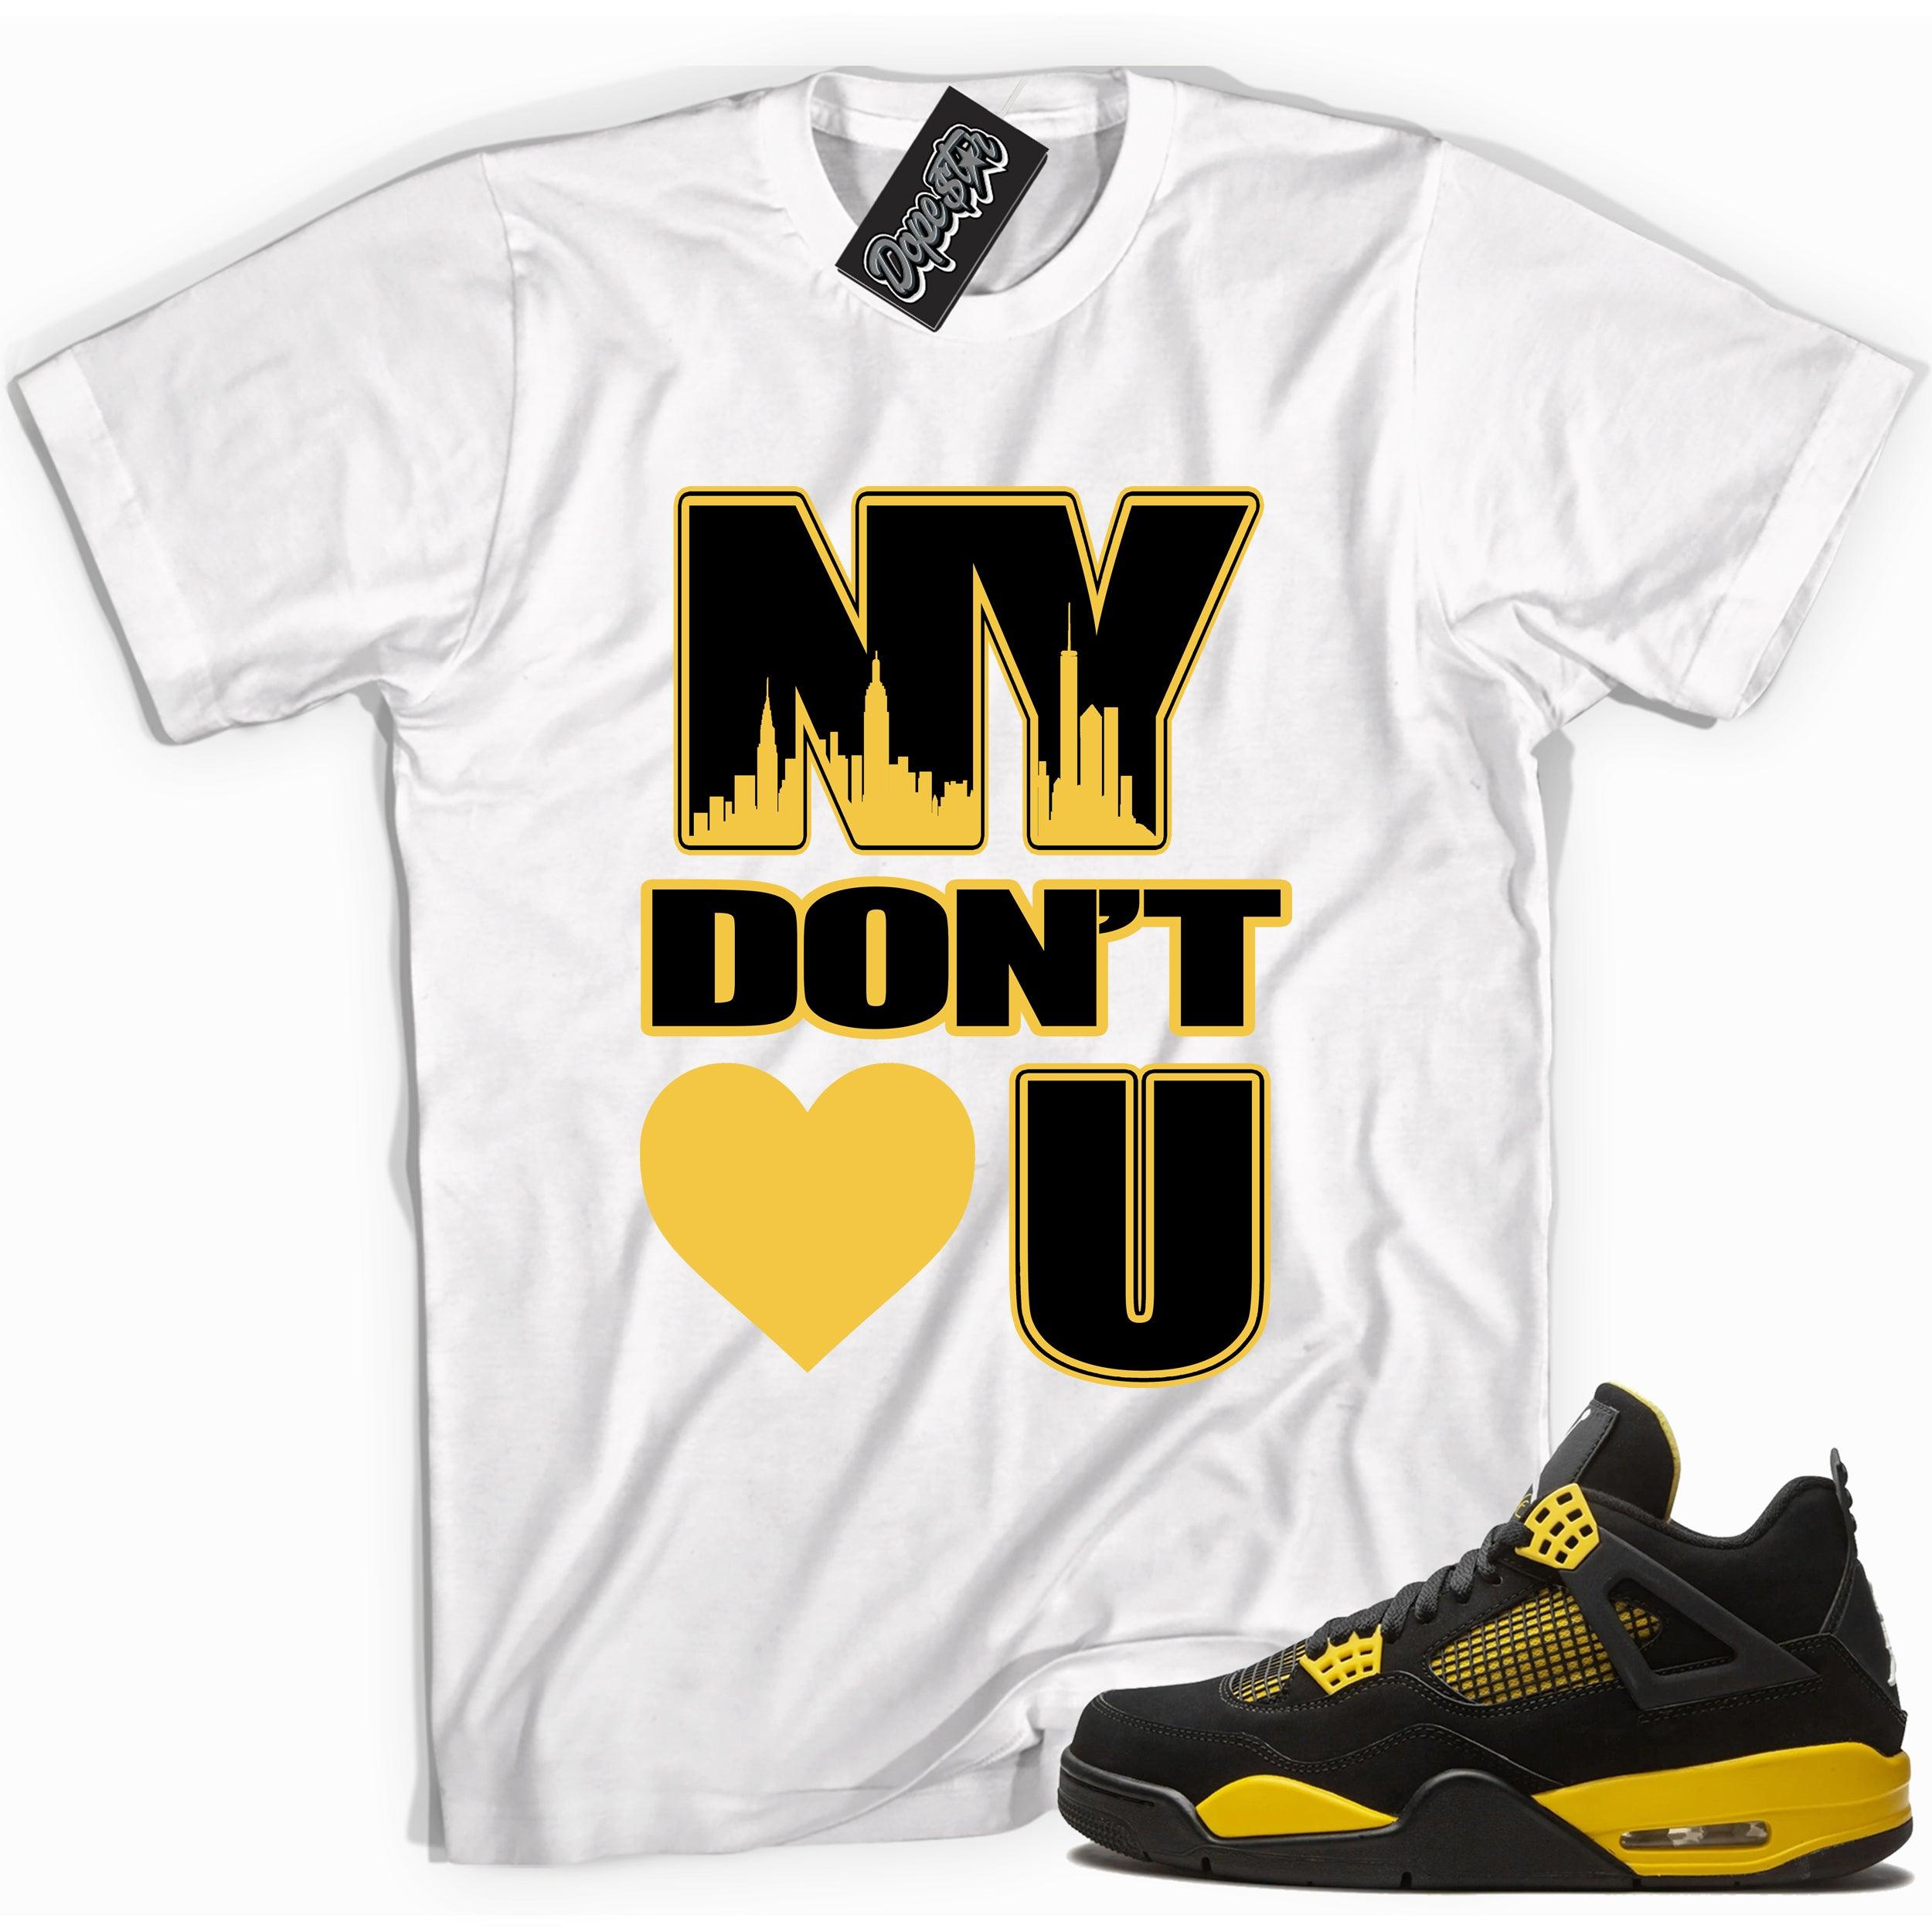 Cool white  graphic tee with 'ny dont love you' print, that perfectly matches Air Jordan 4 Thunder sneakers